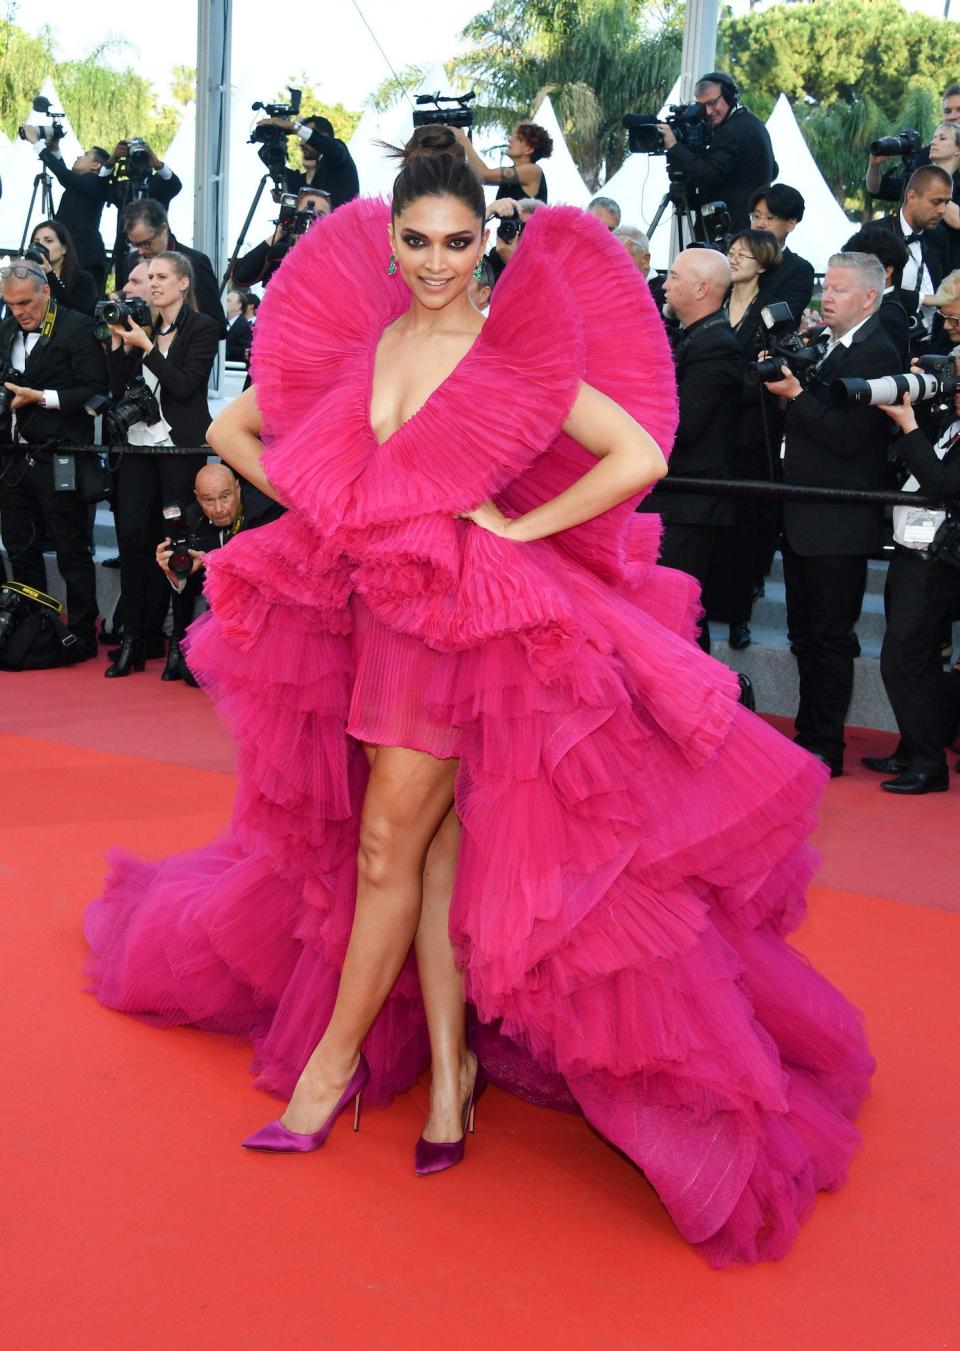 Deepika Padukone at the 2018 Cannes Film Festival in a pink ruffled gown.